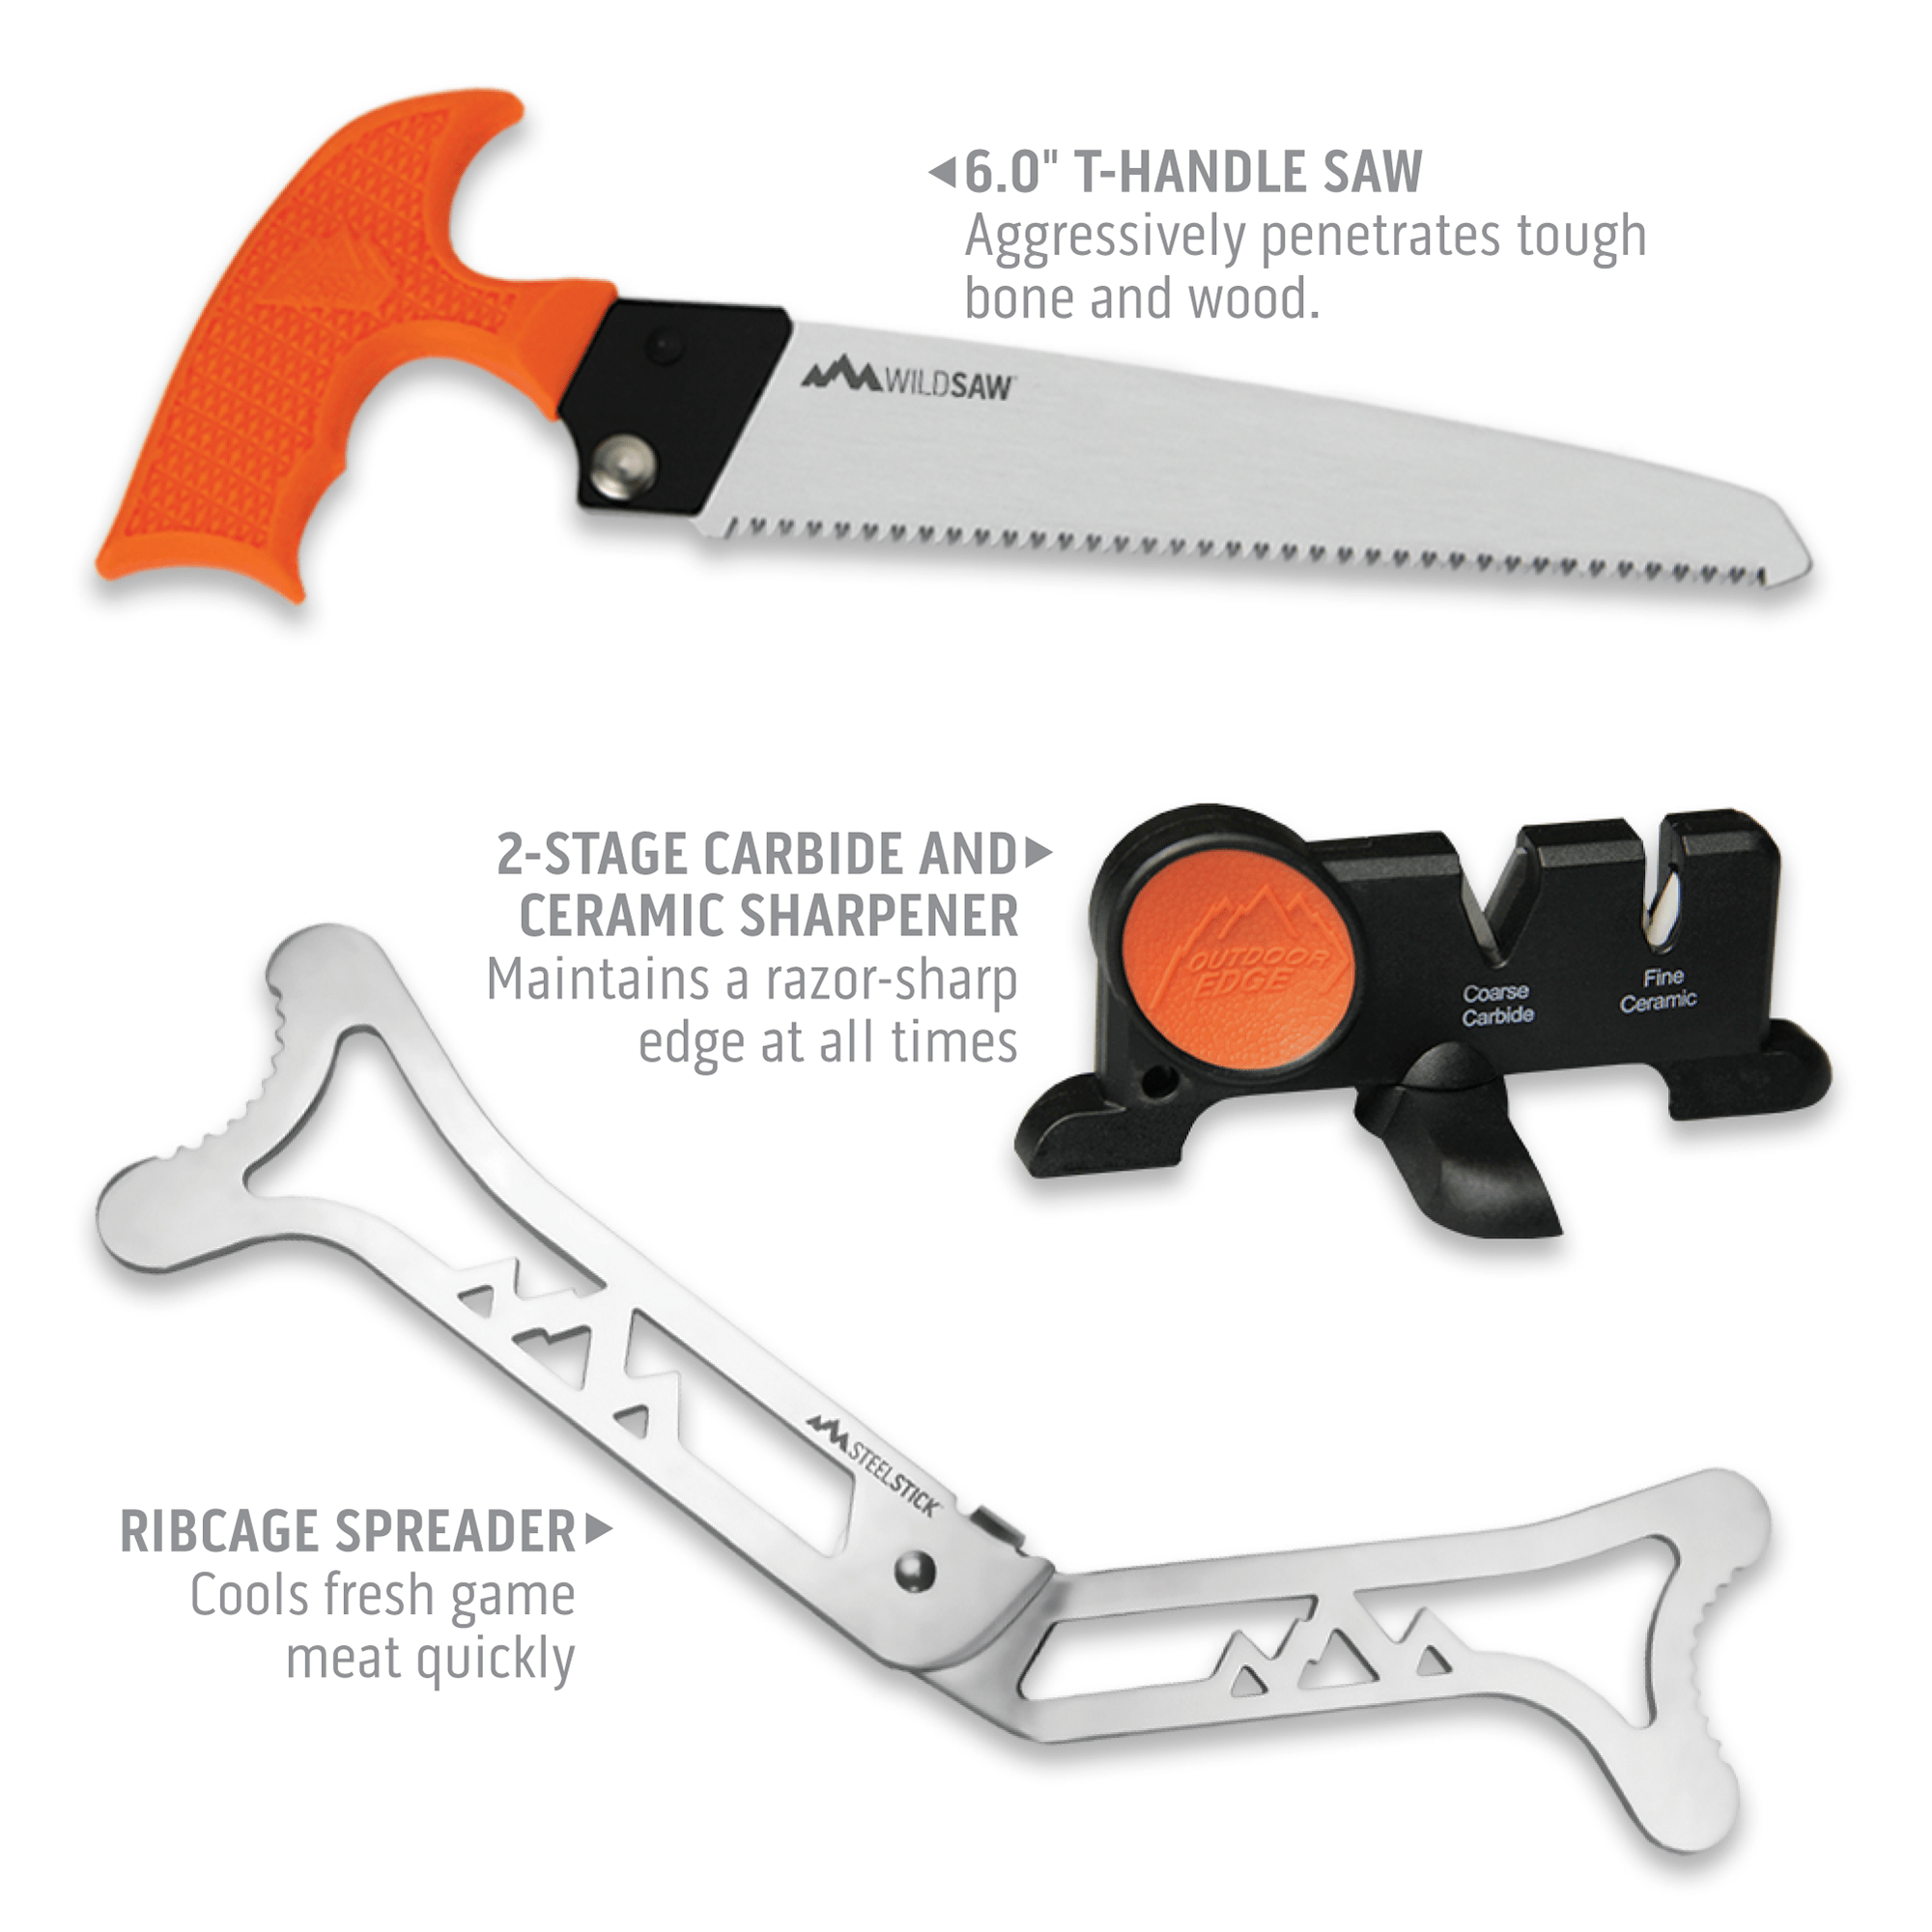 Outdoor Edge Outfitter Hunting Knife Set Product Photo showing t-handle saw, sharpener, and ribcage spreader.